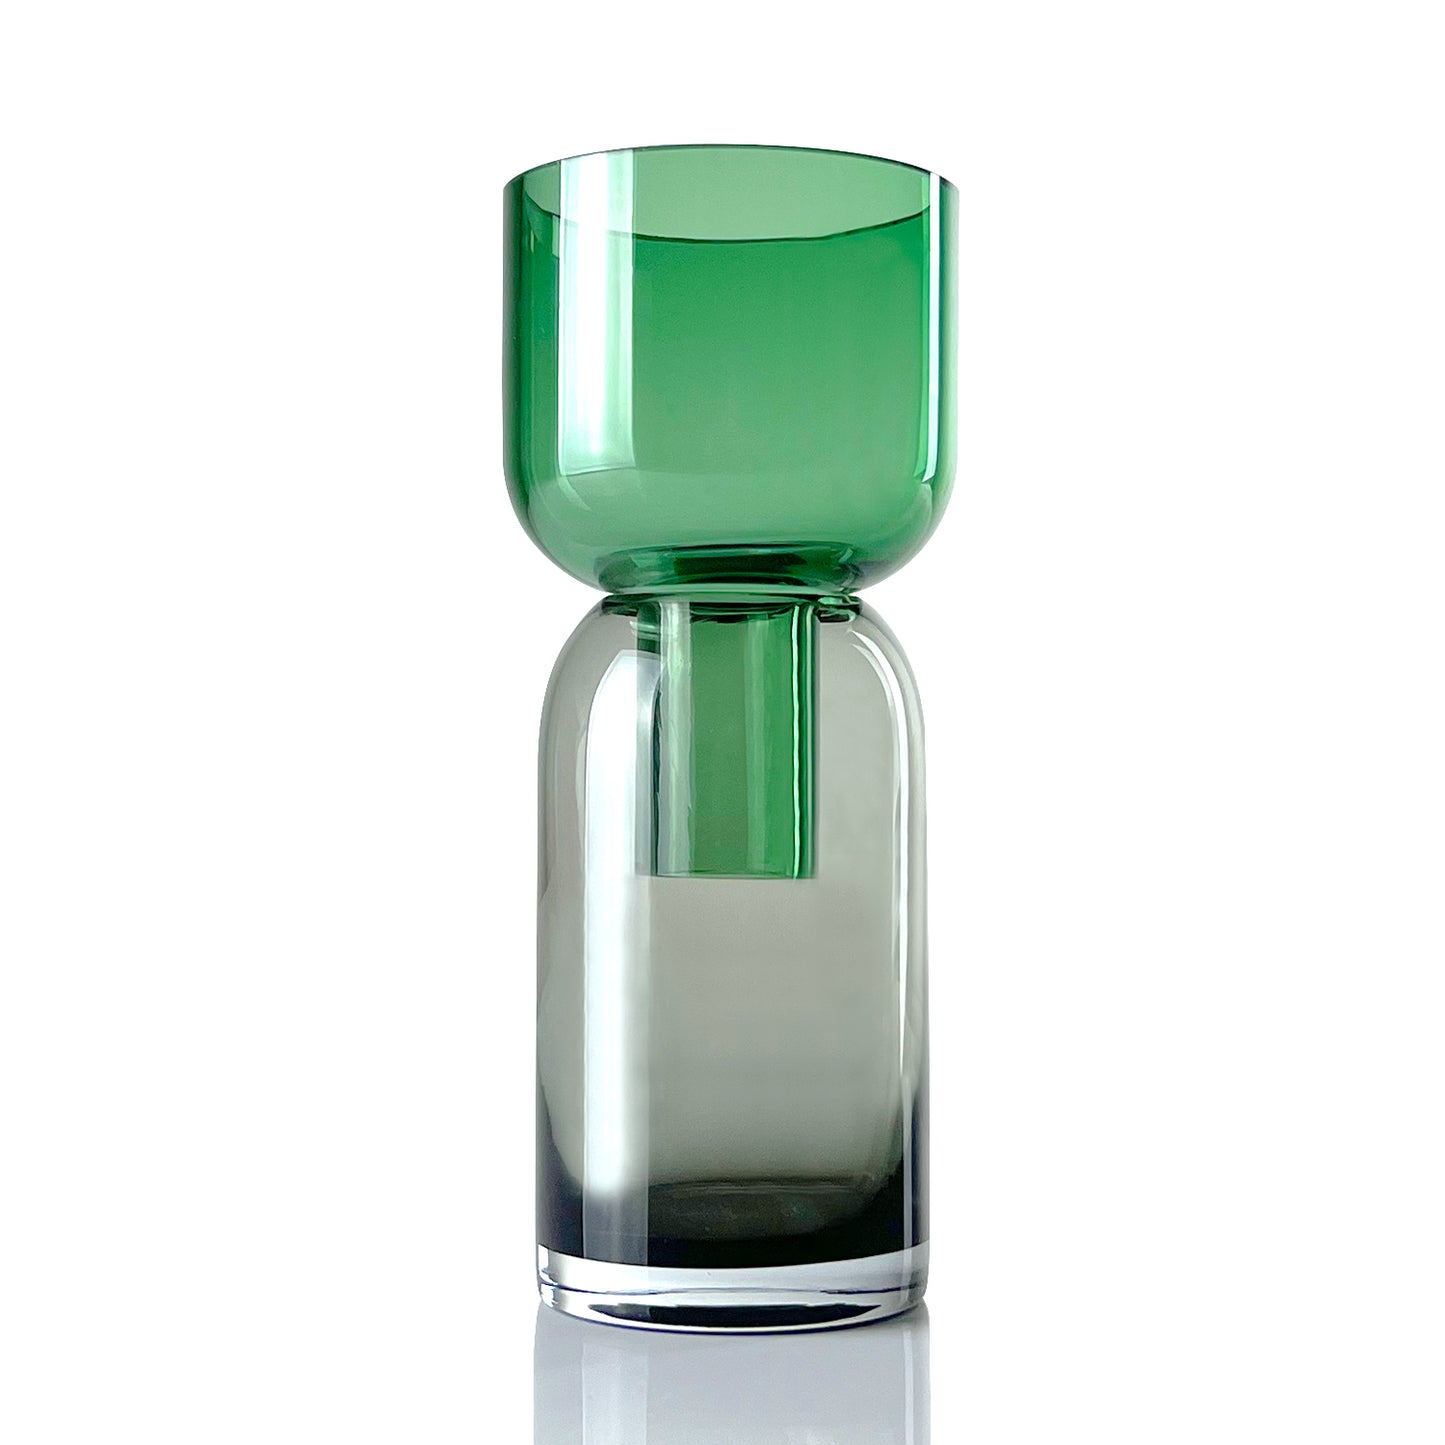 Flip Vase Small Gray and Green - Vase - Reversible - Borosilicate Glass - Dual Sided - Floral